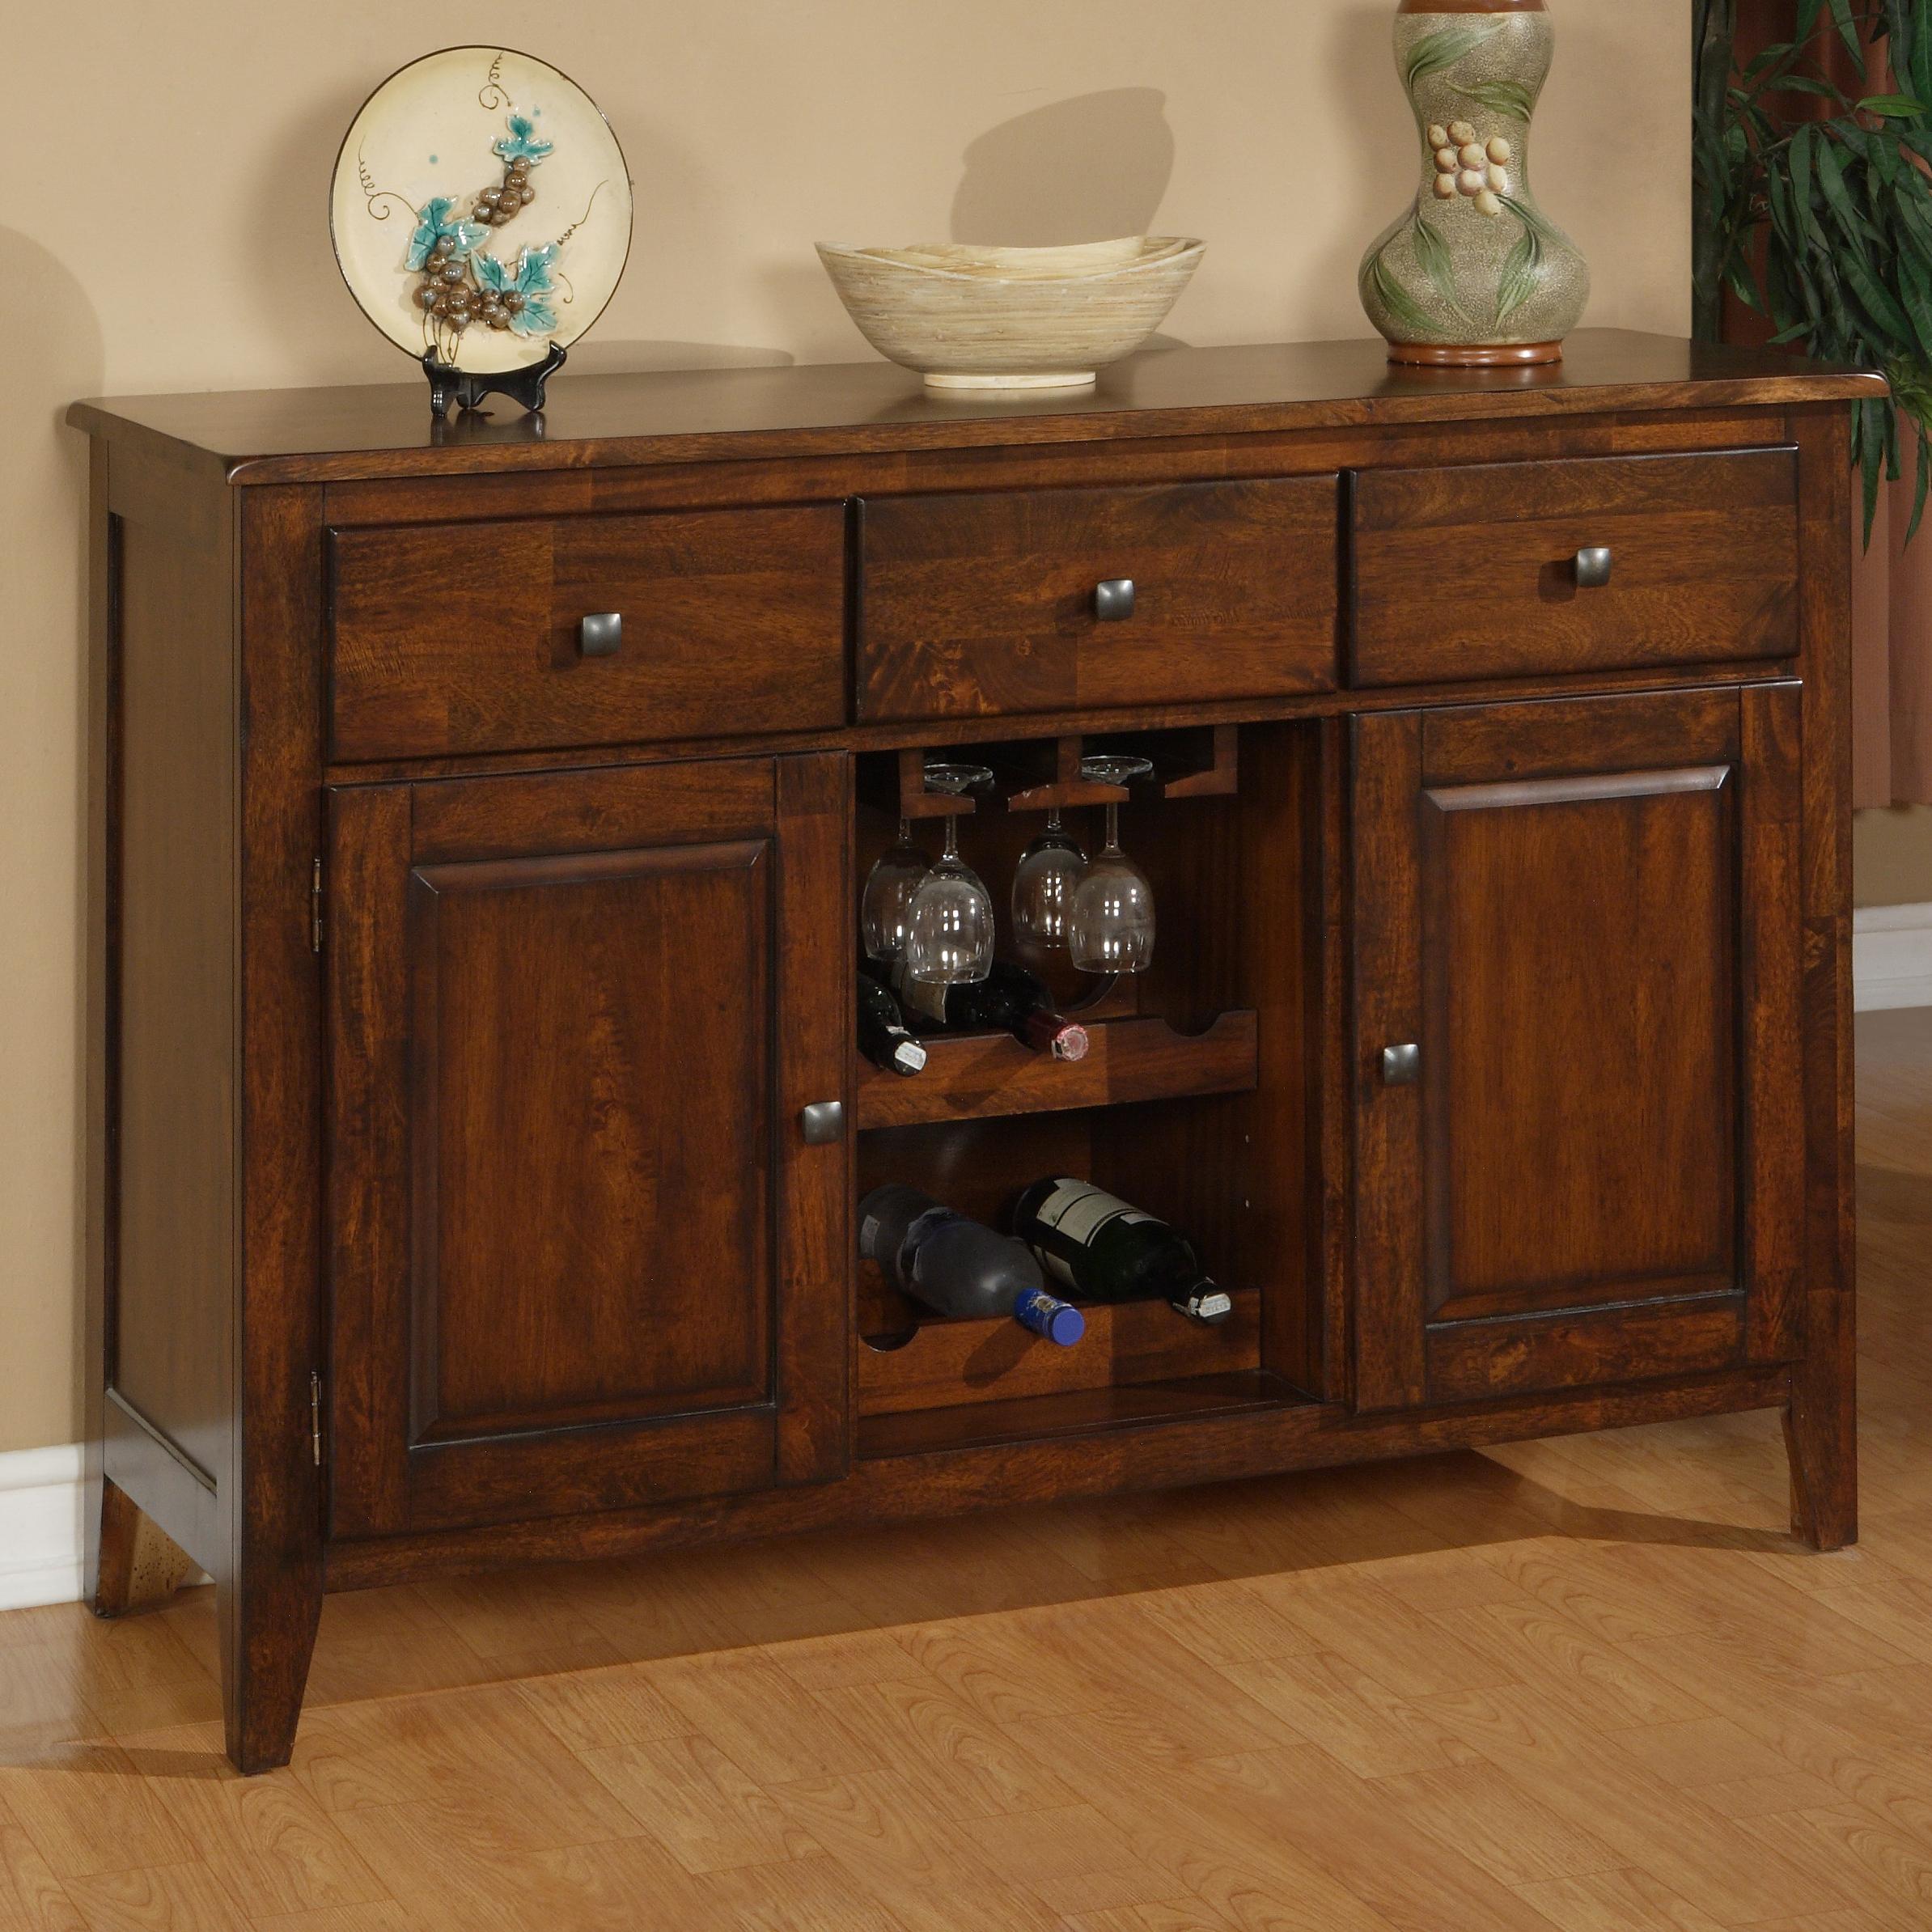 Holland House 1279 Mango Wood Dining Room Sideboard | FMG - Local ...